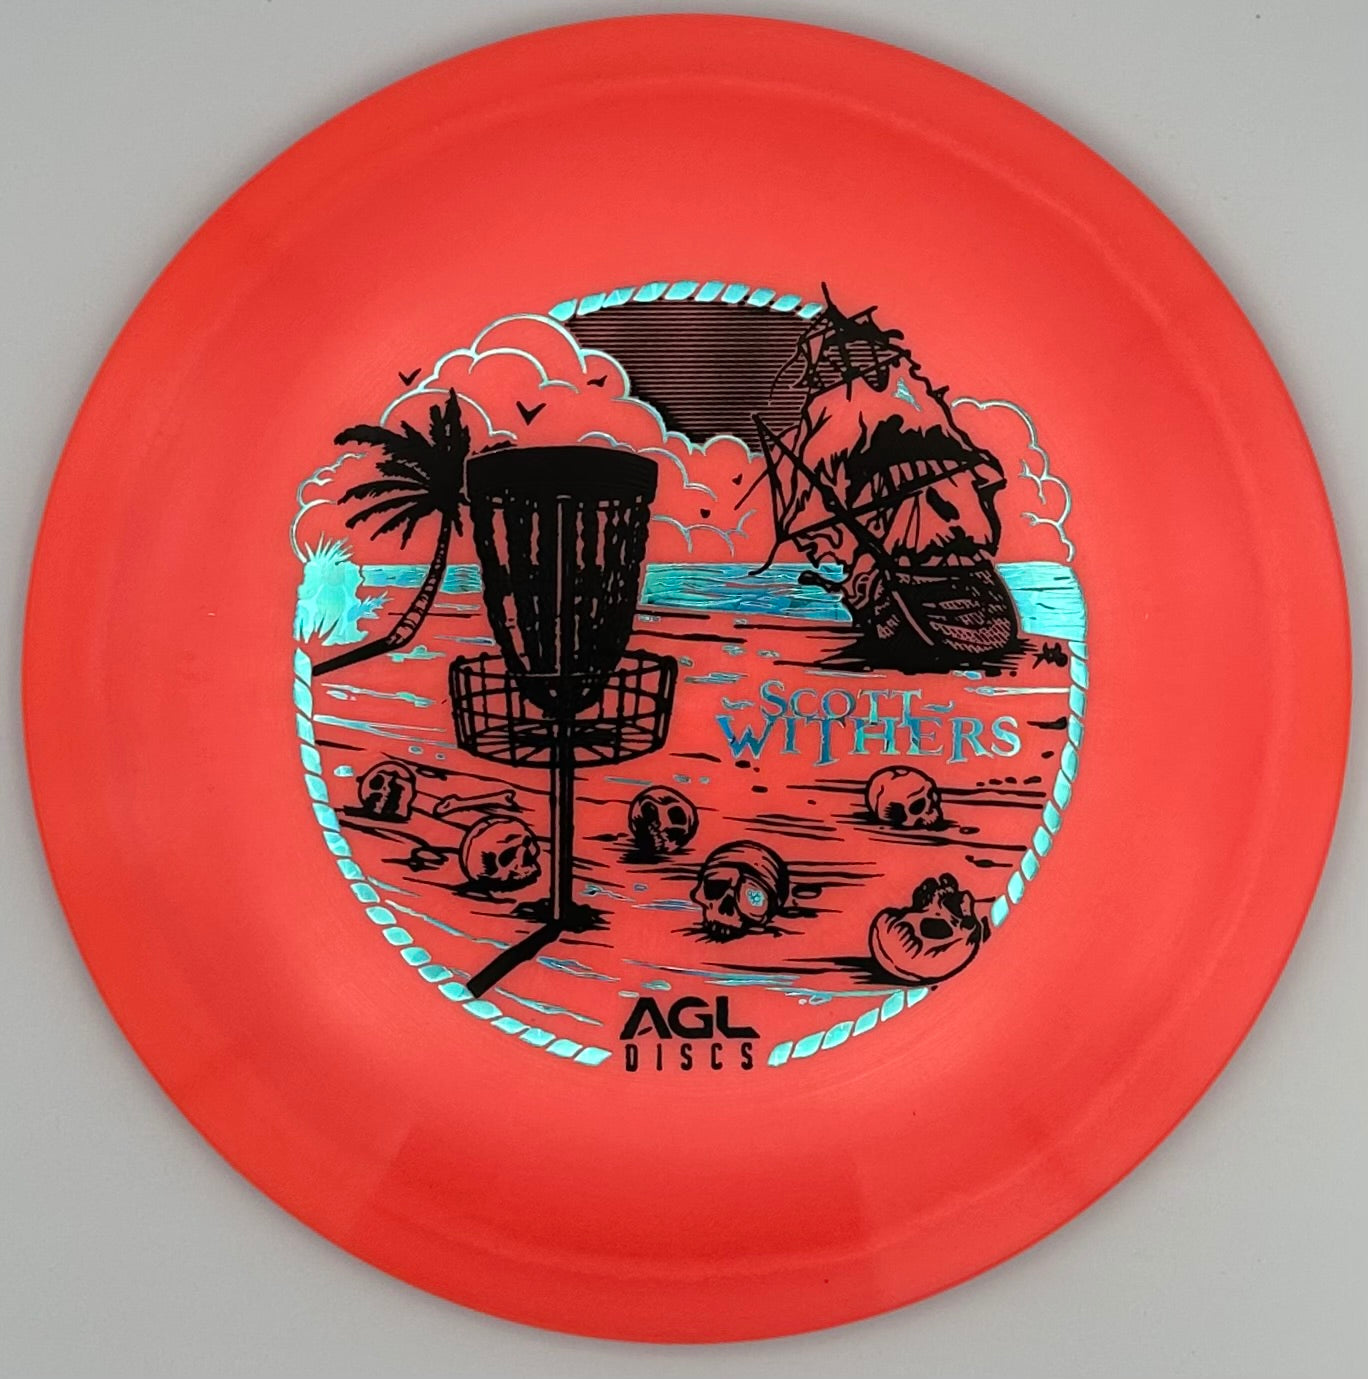 AGL Discs - Red Alpine Sycamore (Scott Withers Tour Stamp)